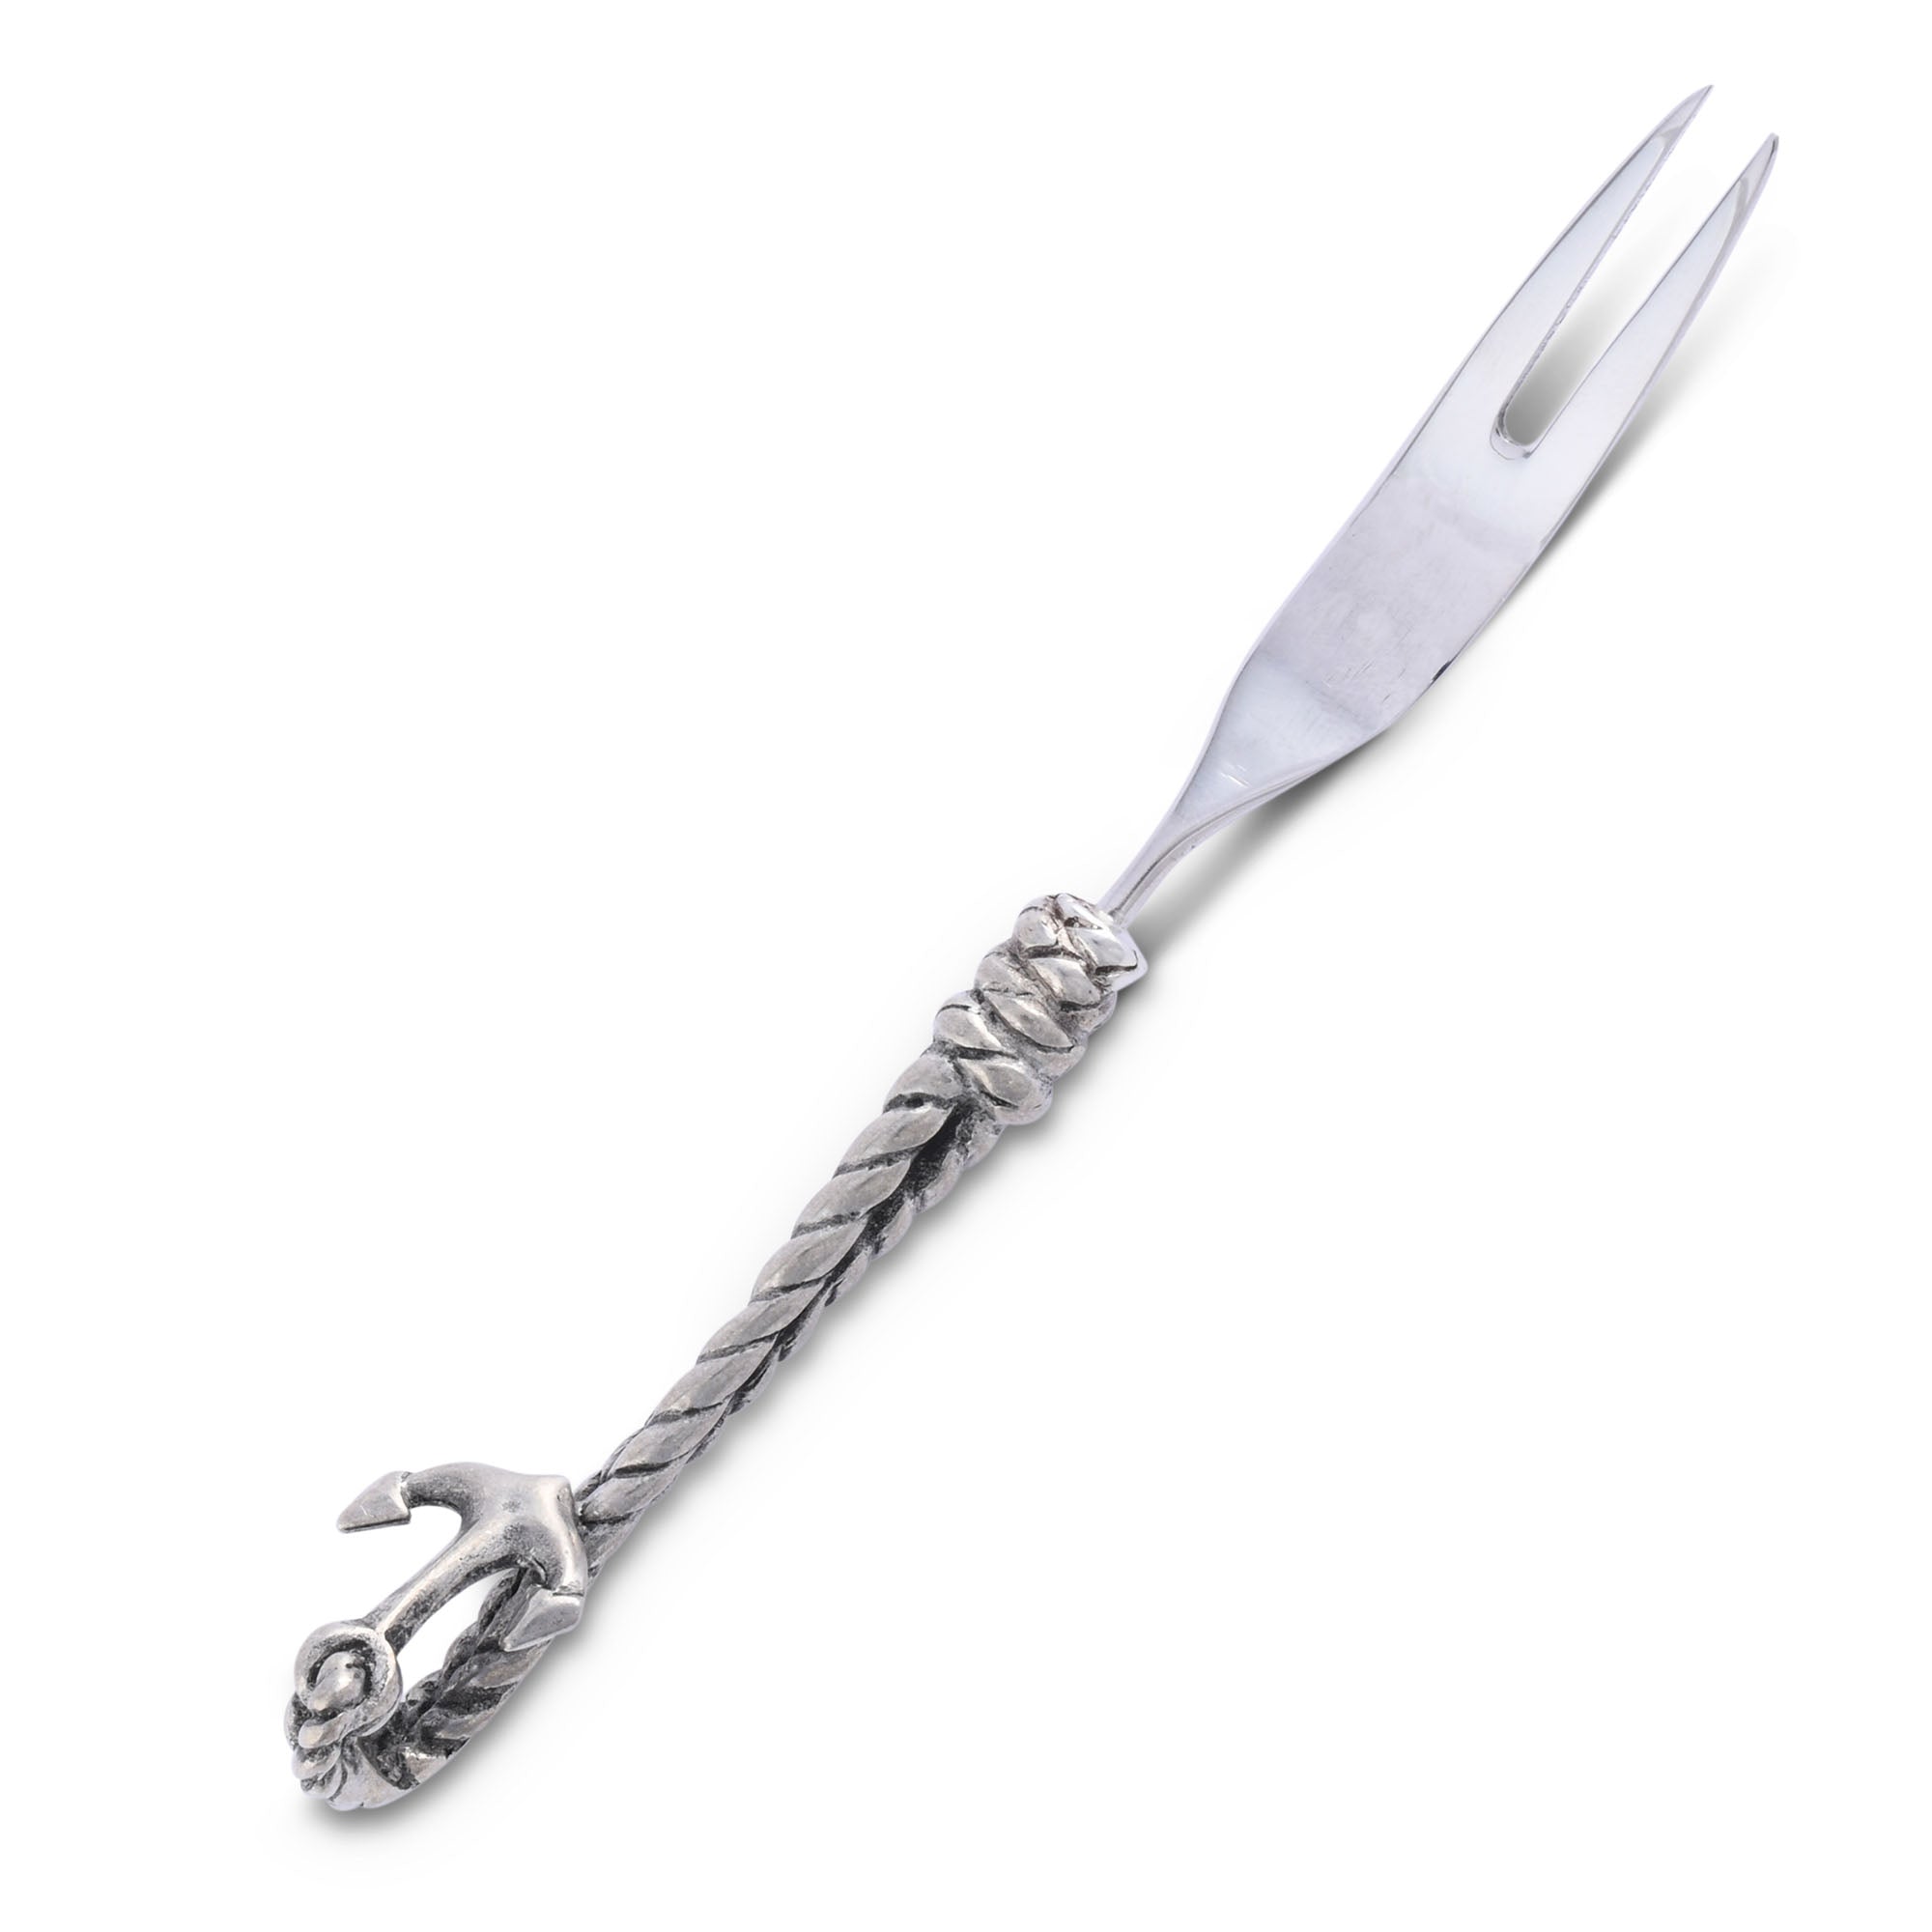 Vagabond House Rope and Anchor Hors d'oeuvre Fork Product Image